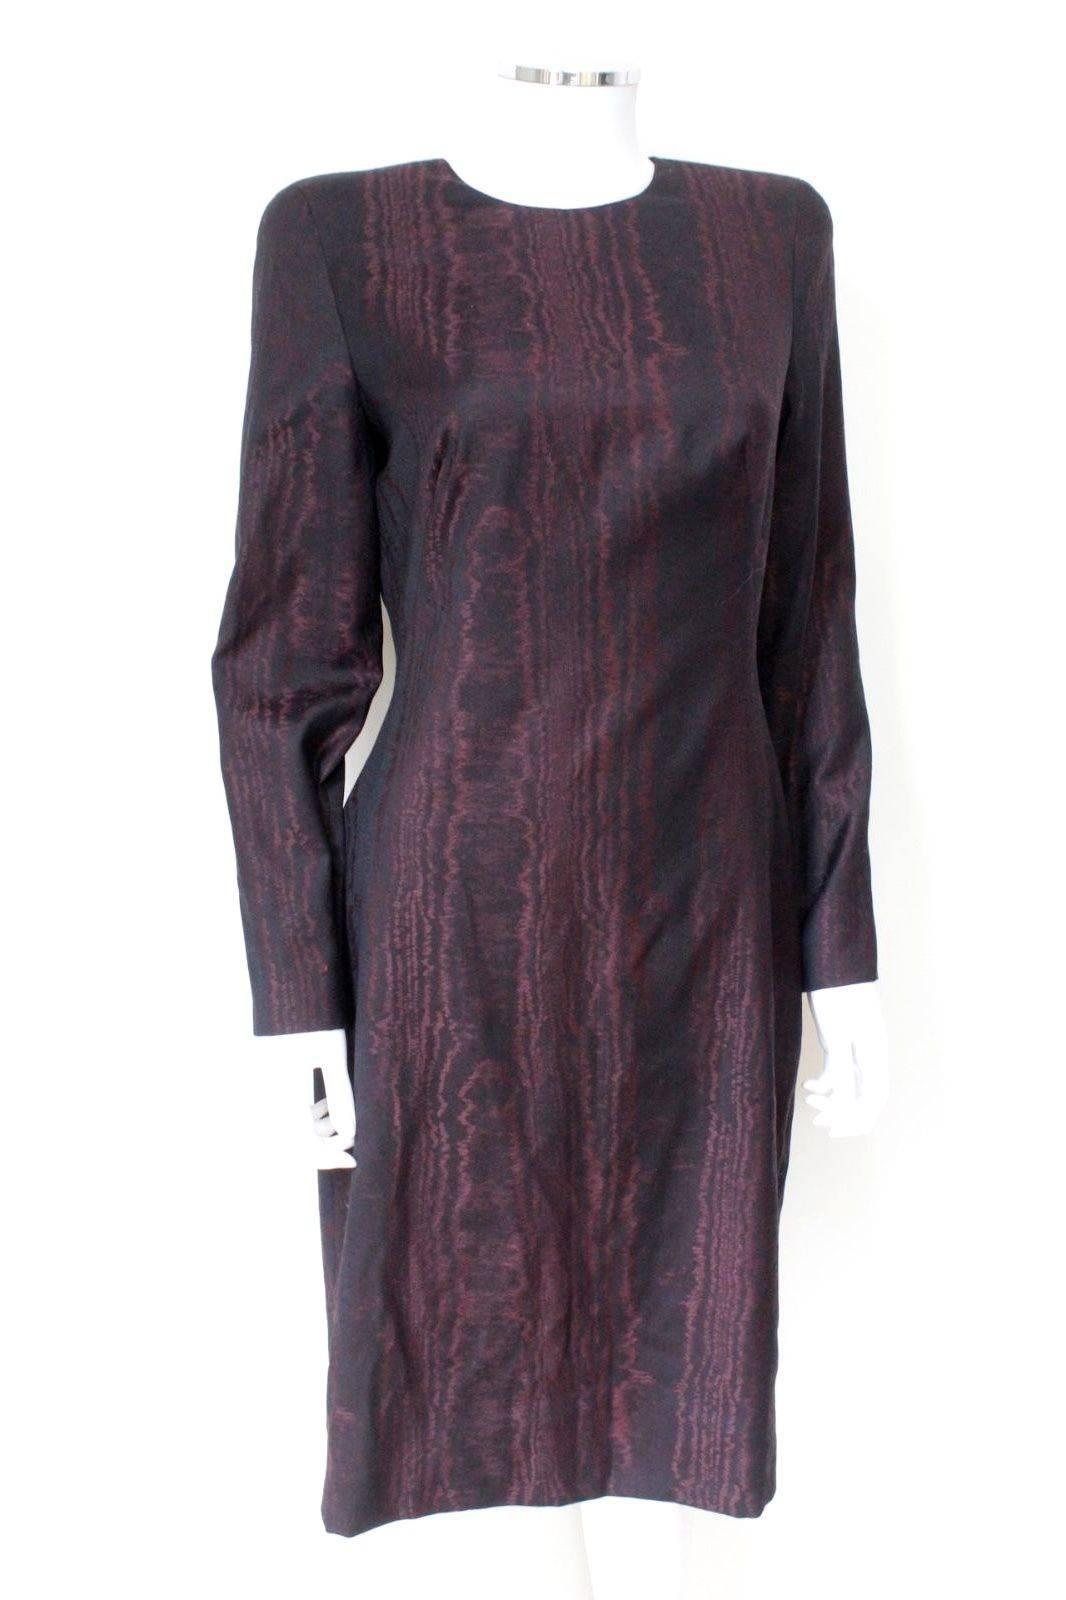  ALEXANDER MCQUEEN Burgundy Black Wool-Crepe Dress It 46 uk 12-14 
This amazing dress from Alexander McQueen featuring a wood like print 
Fully lined 
100% fine wool 
Length 40 inches, chest 19 inches across, waist 15.5 inches, hips 20 inches across